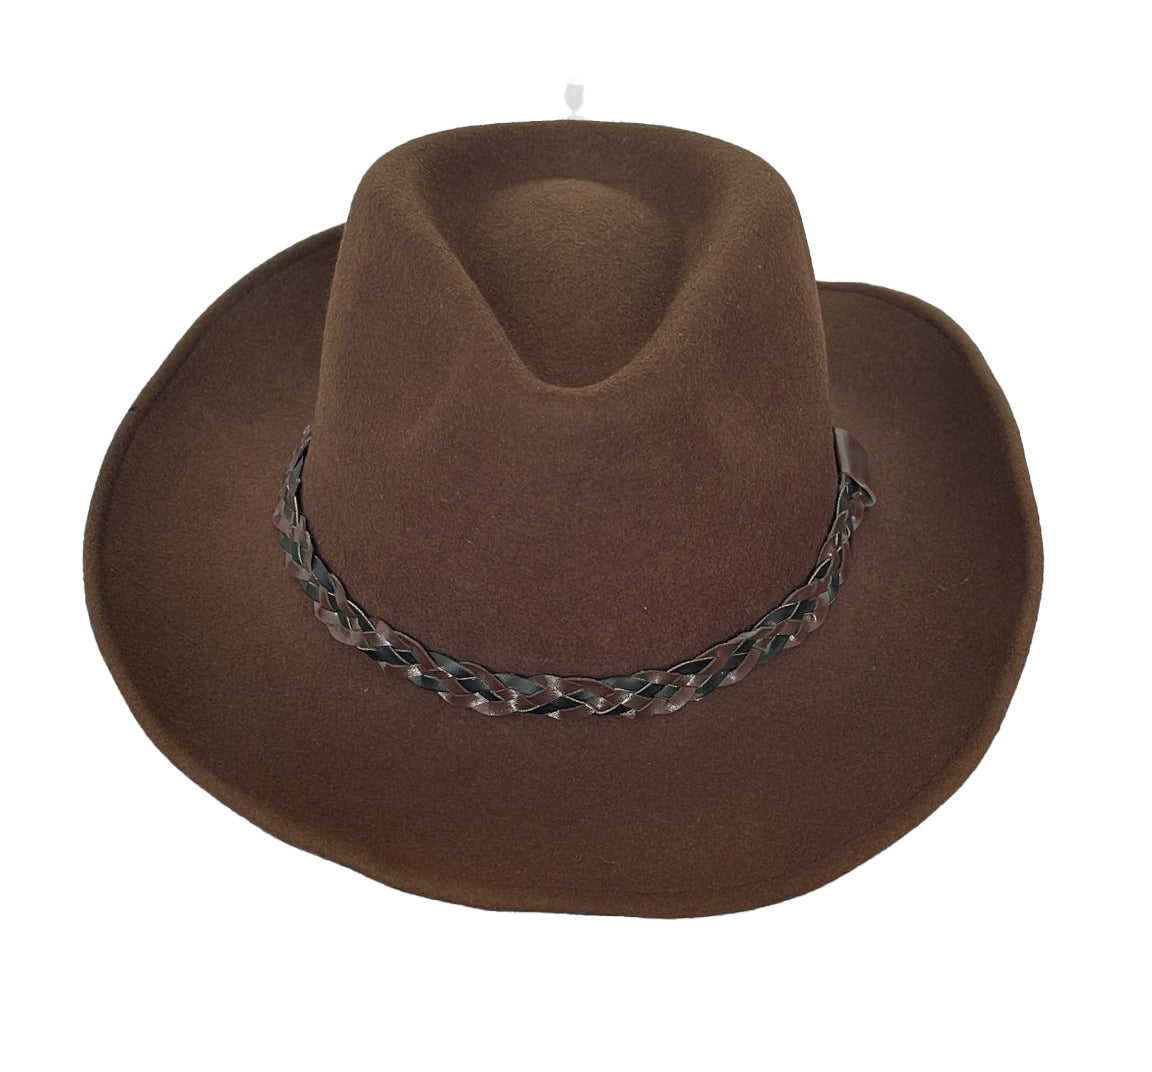 Crumplative wool felt hat for women and men with brass buckle | Size 56-57 cm